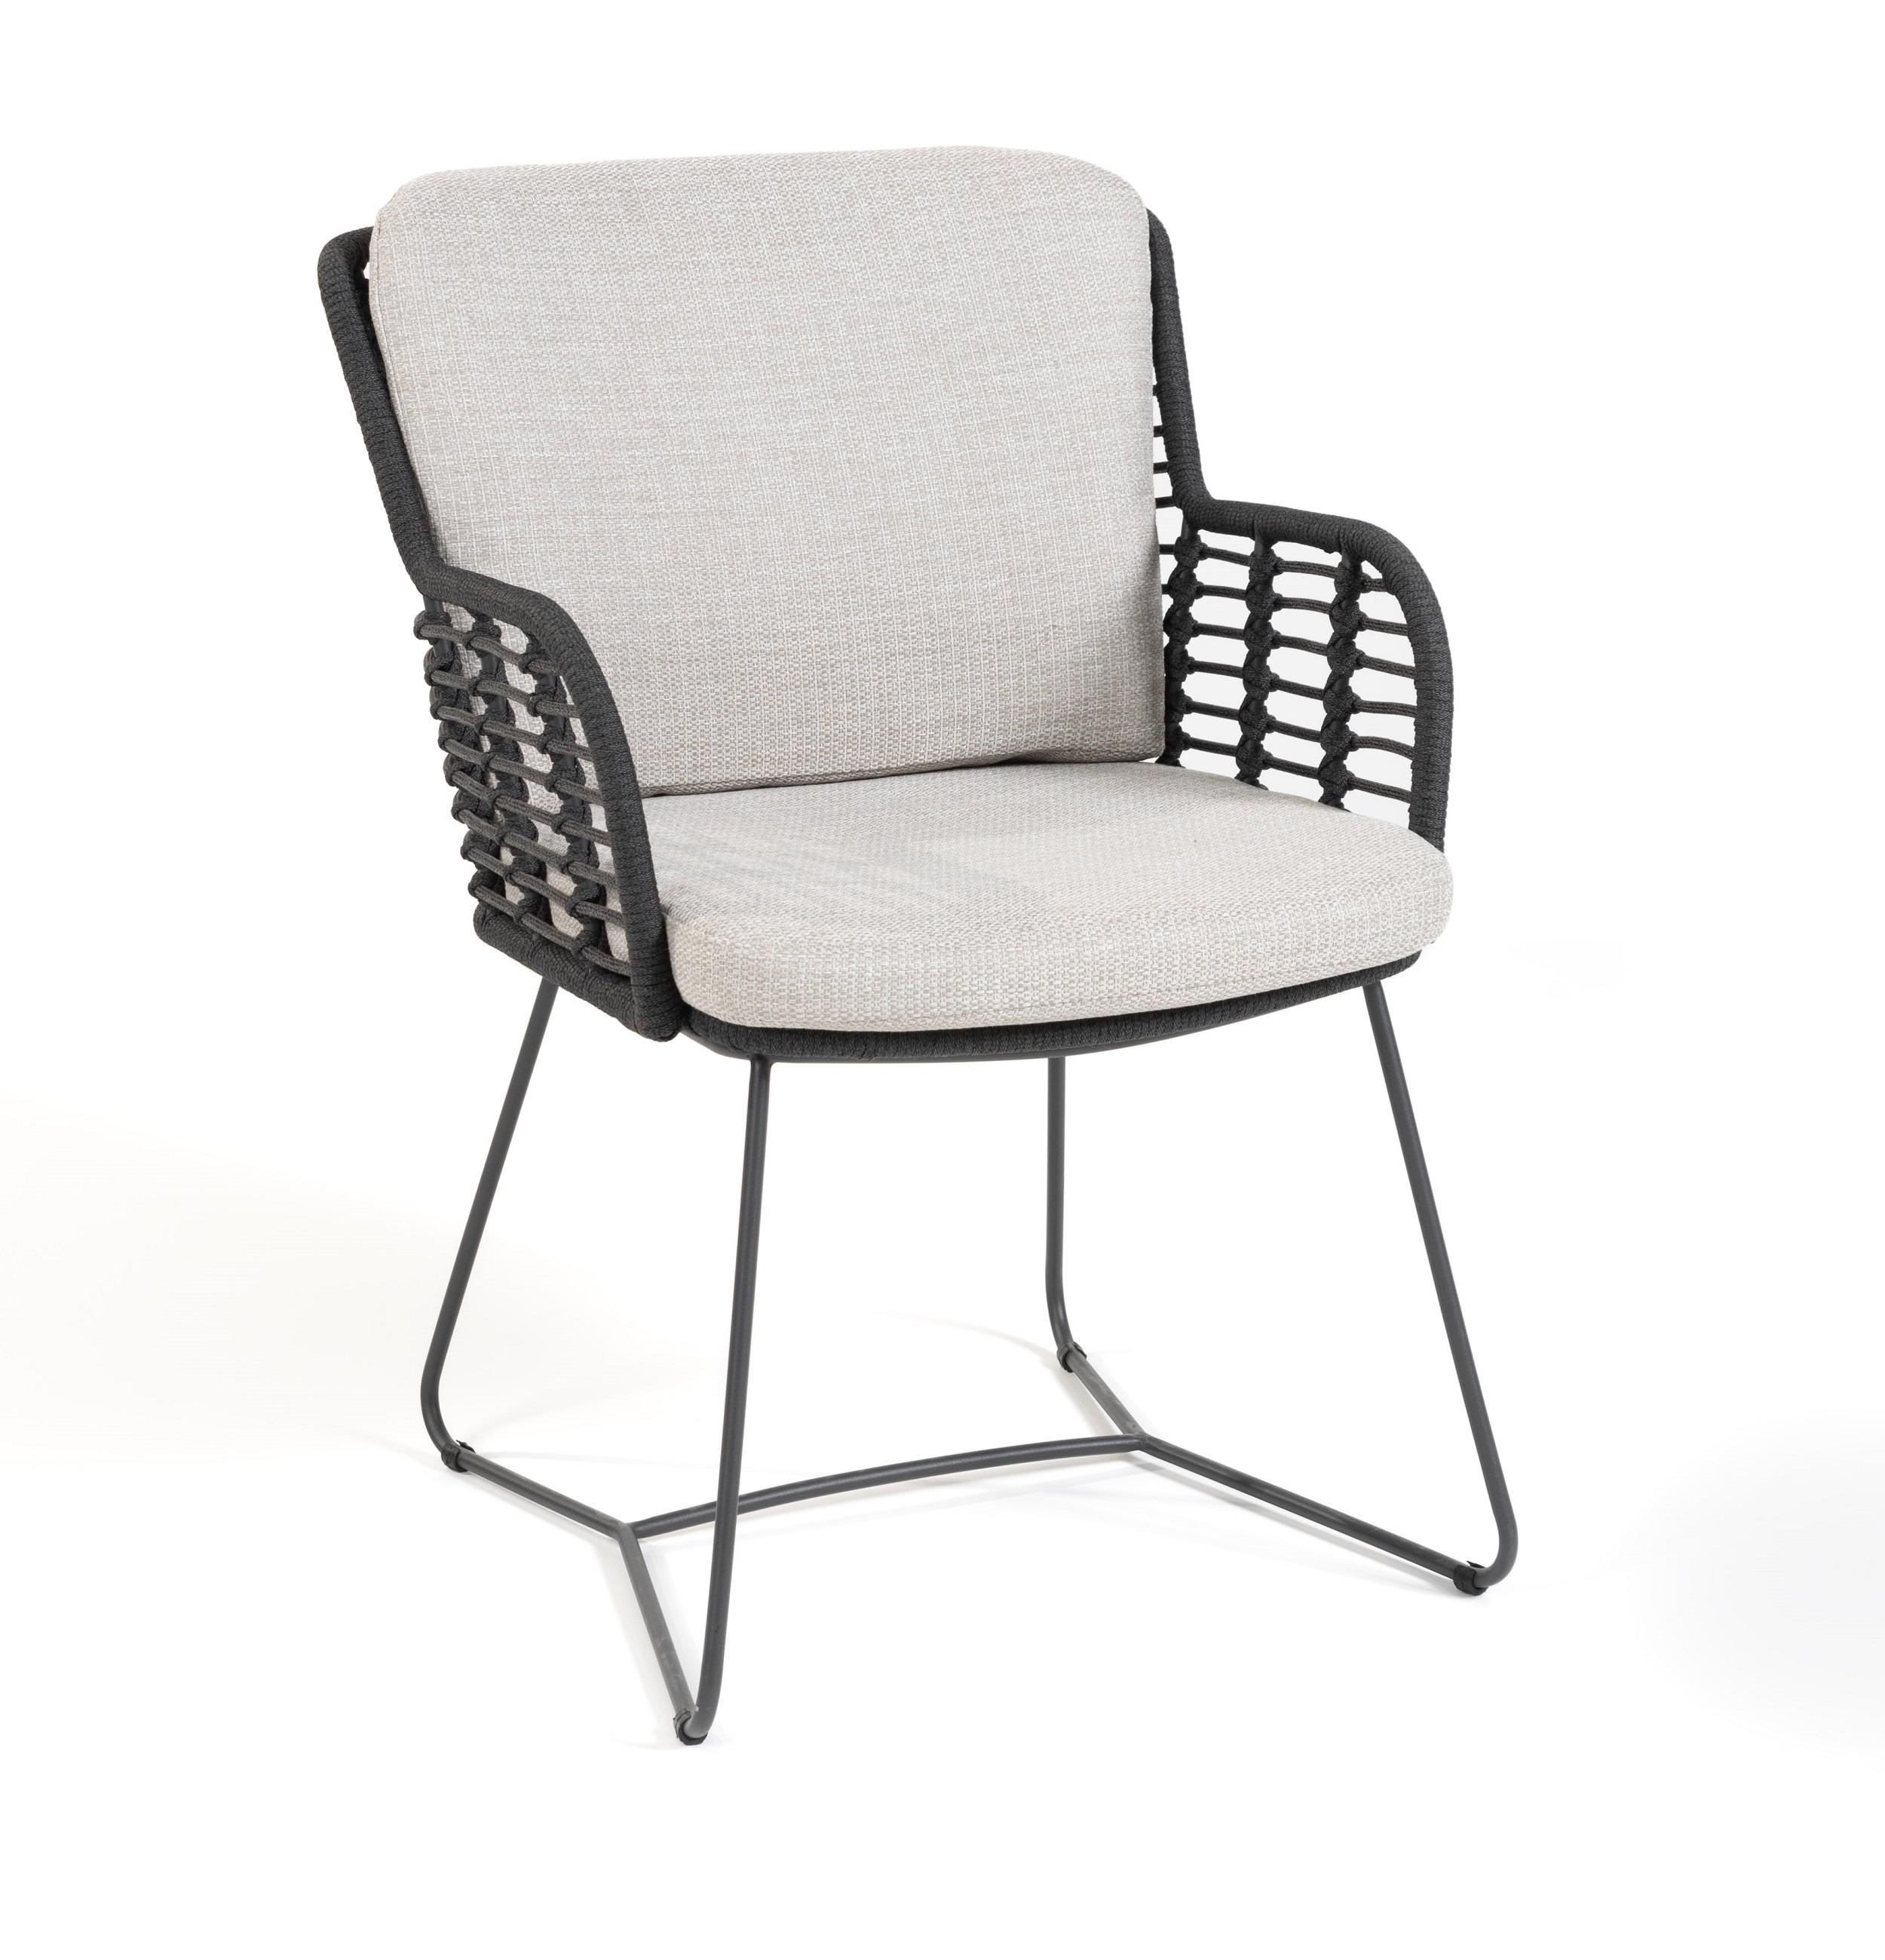 modern rope weave garden dining chair with all weather light grey cushions cut out